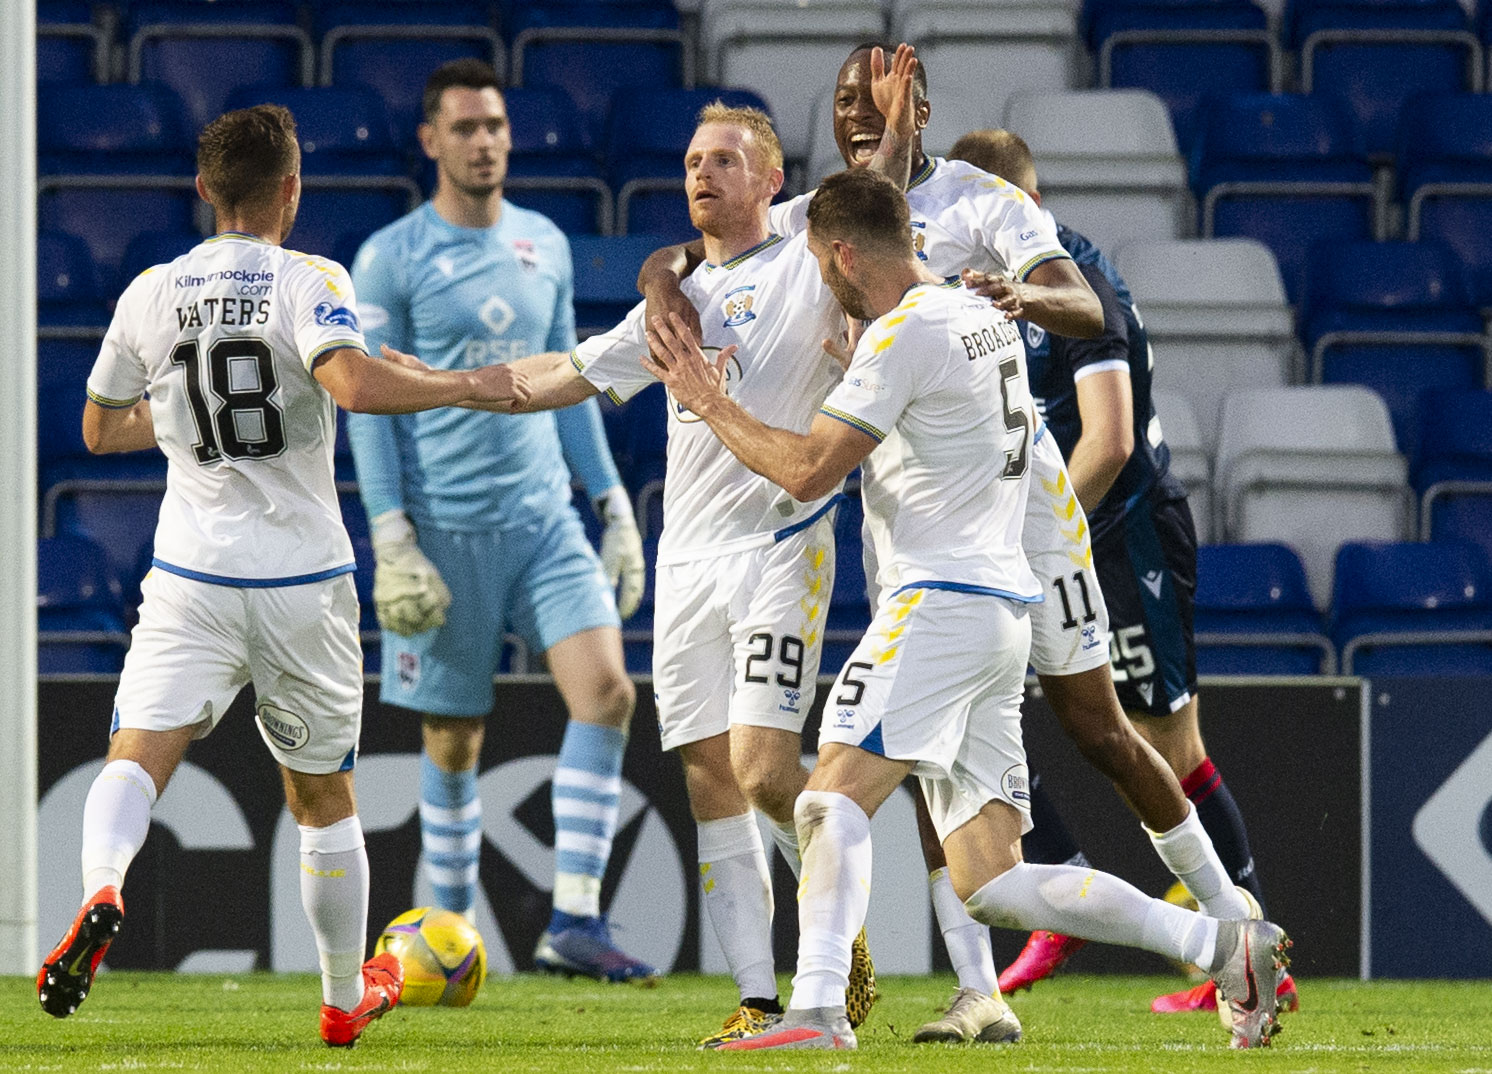 Kilmarnock's Chris Burke is mobbed after scoring against Ross County.